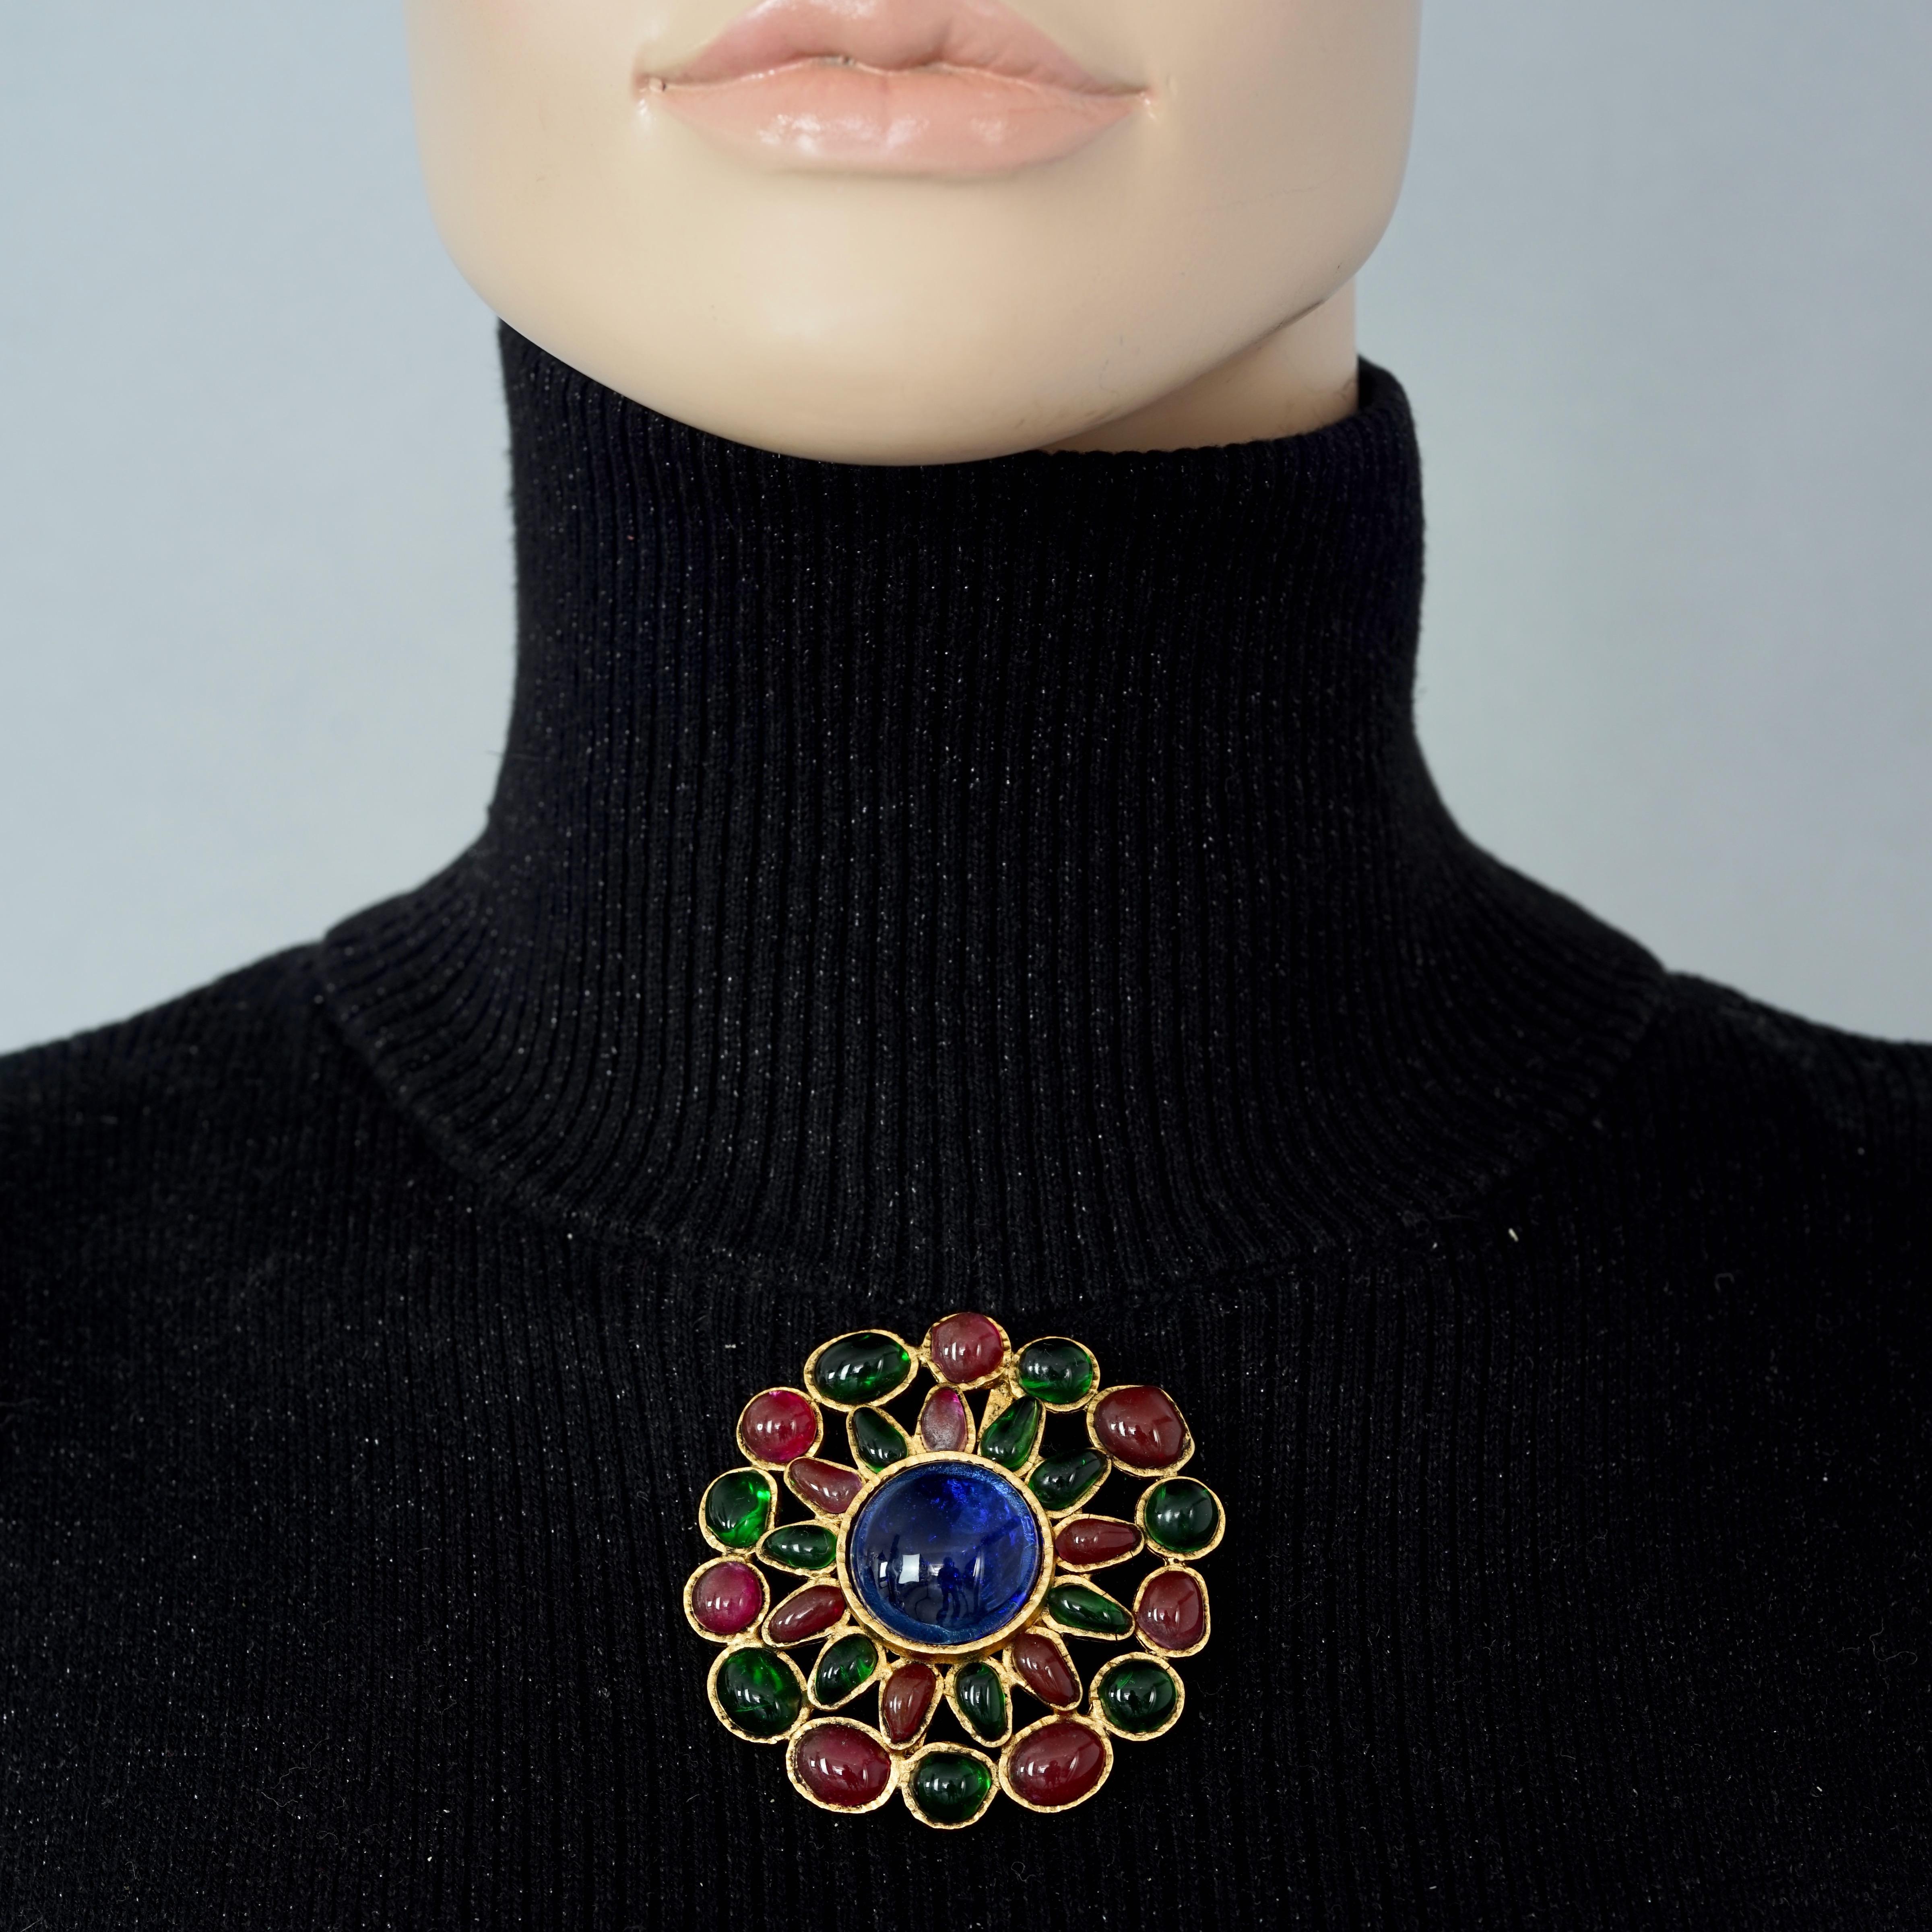 Vintage Iconic GRIPOIX Green Red Blue Flower Pendant Brooch

Measurements:
Height: 2.40 inches (6.1 cms)
Width: 2.40 inches (6.1 cms)

Features:
- Iconic green, red and blue Gripoix/ glass poured flower pendant brooch.
- Gold tone hardware.
- Choker